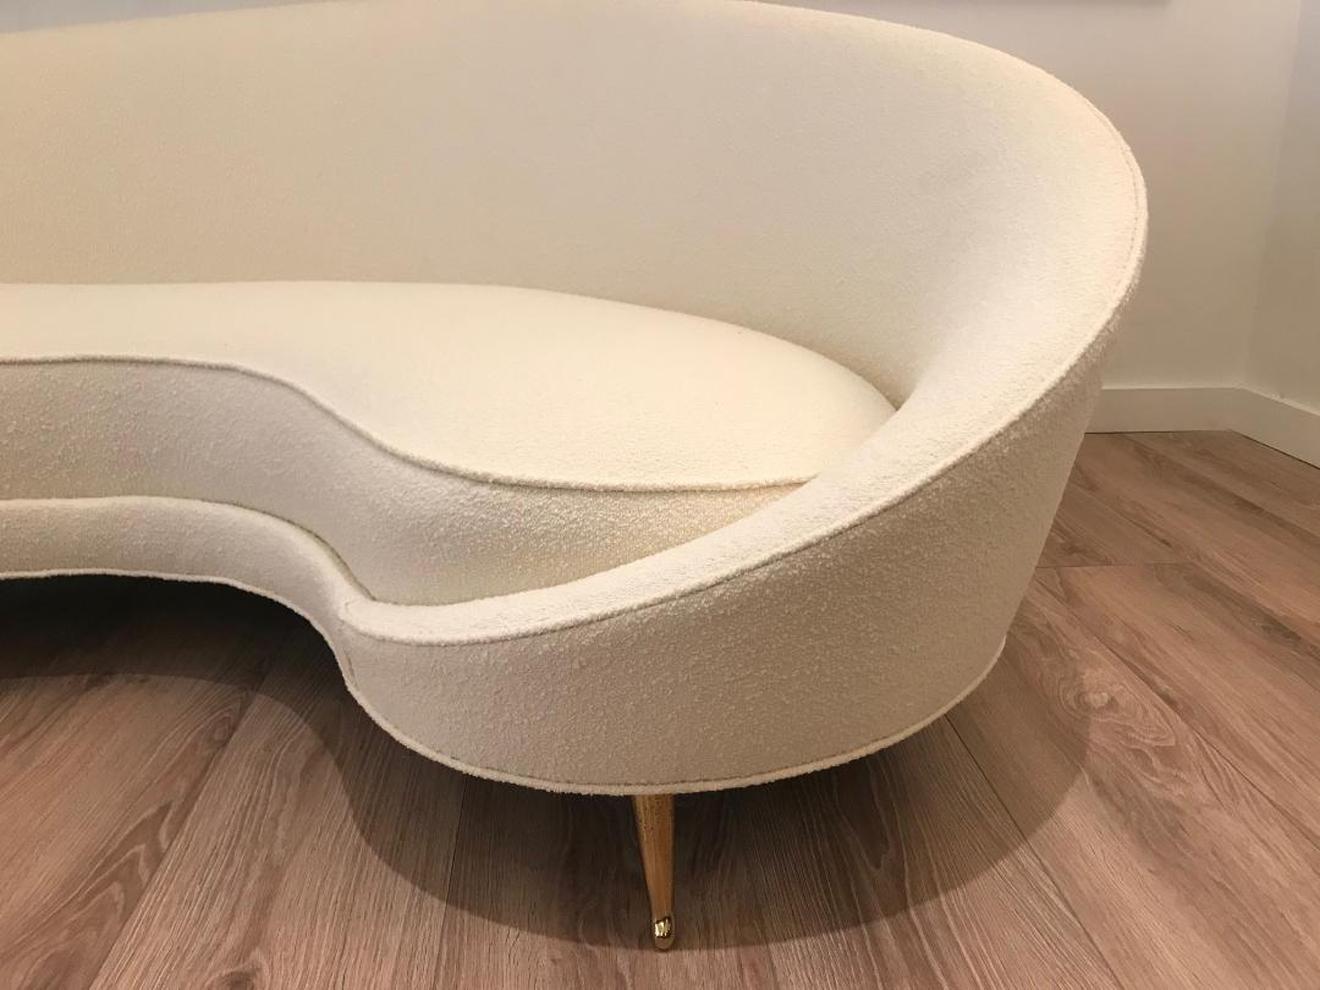 Midcentury Italian large curved sofa by Federico Munari.
Newly upholstered with Classic pearl bouclé by Knoll. Brass plated legs. Completely restored to perfection by our local artisans. Very sensual curves and absolutely comfortable kidney shape